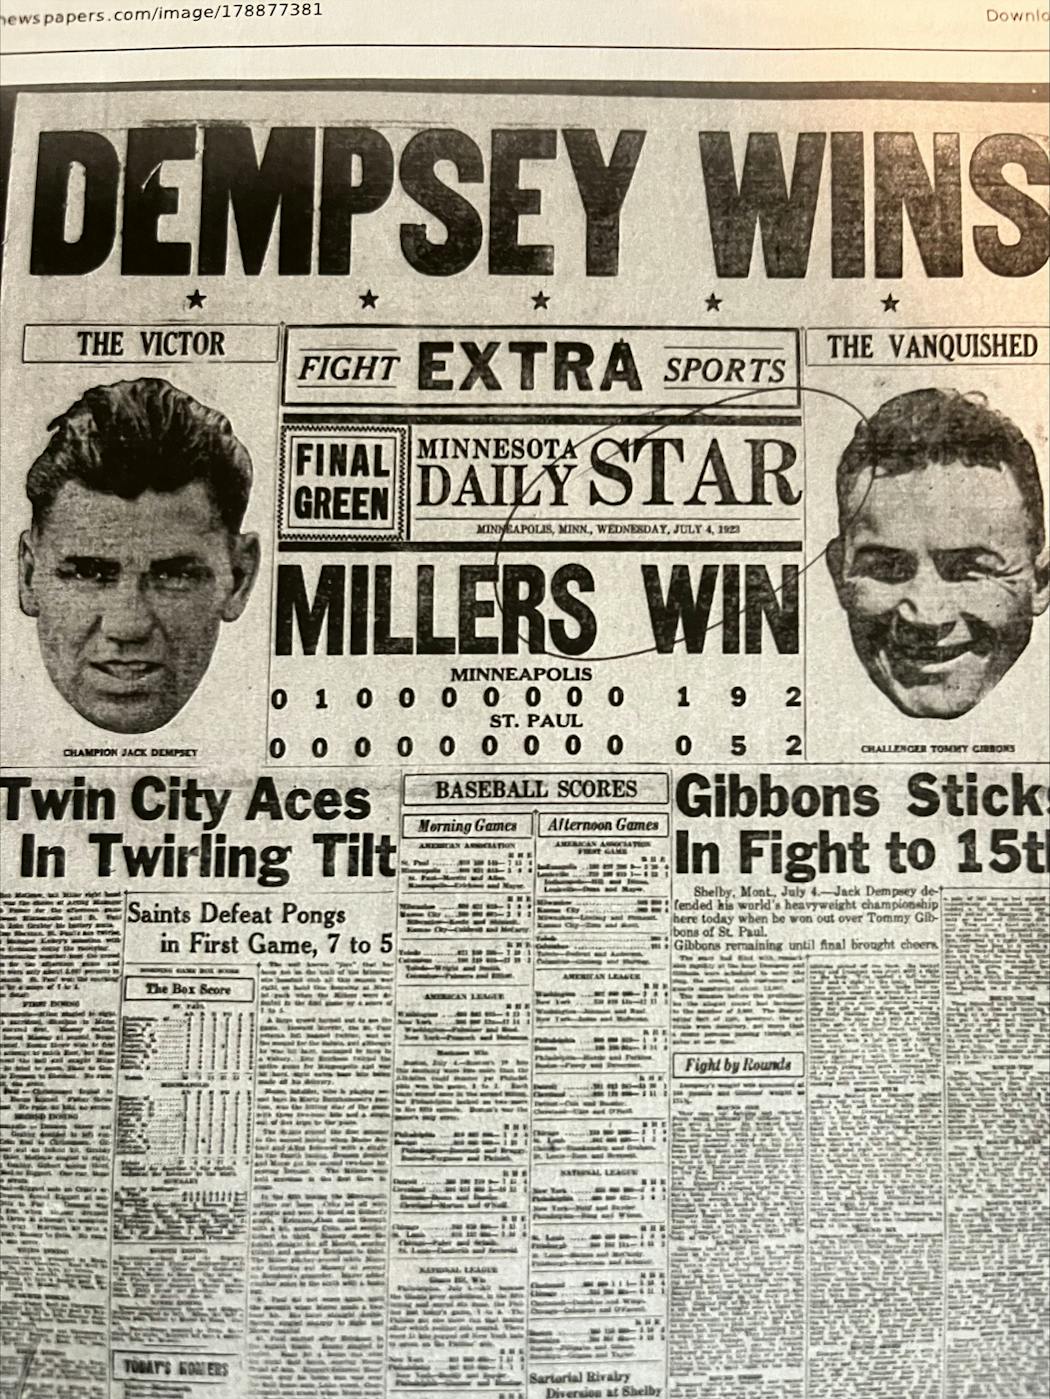 The Minneapolis Daily Star was one of several Twin Cities papers provided elaborate coverage of the 1923 heavyweight title fight between champion Jack Dempsey and challenger Tommy Gibbons from St. Paul in Shelby, Mont.